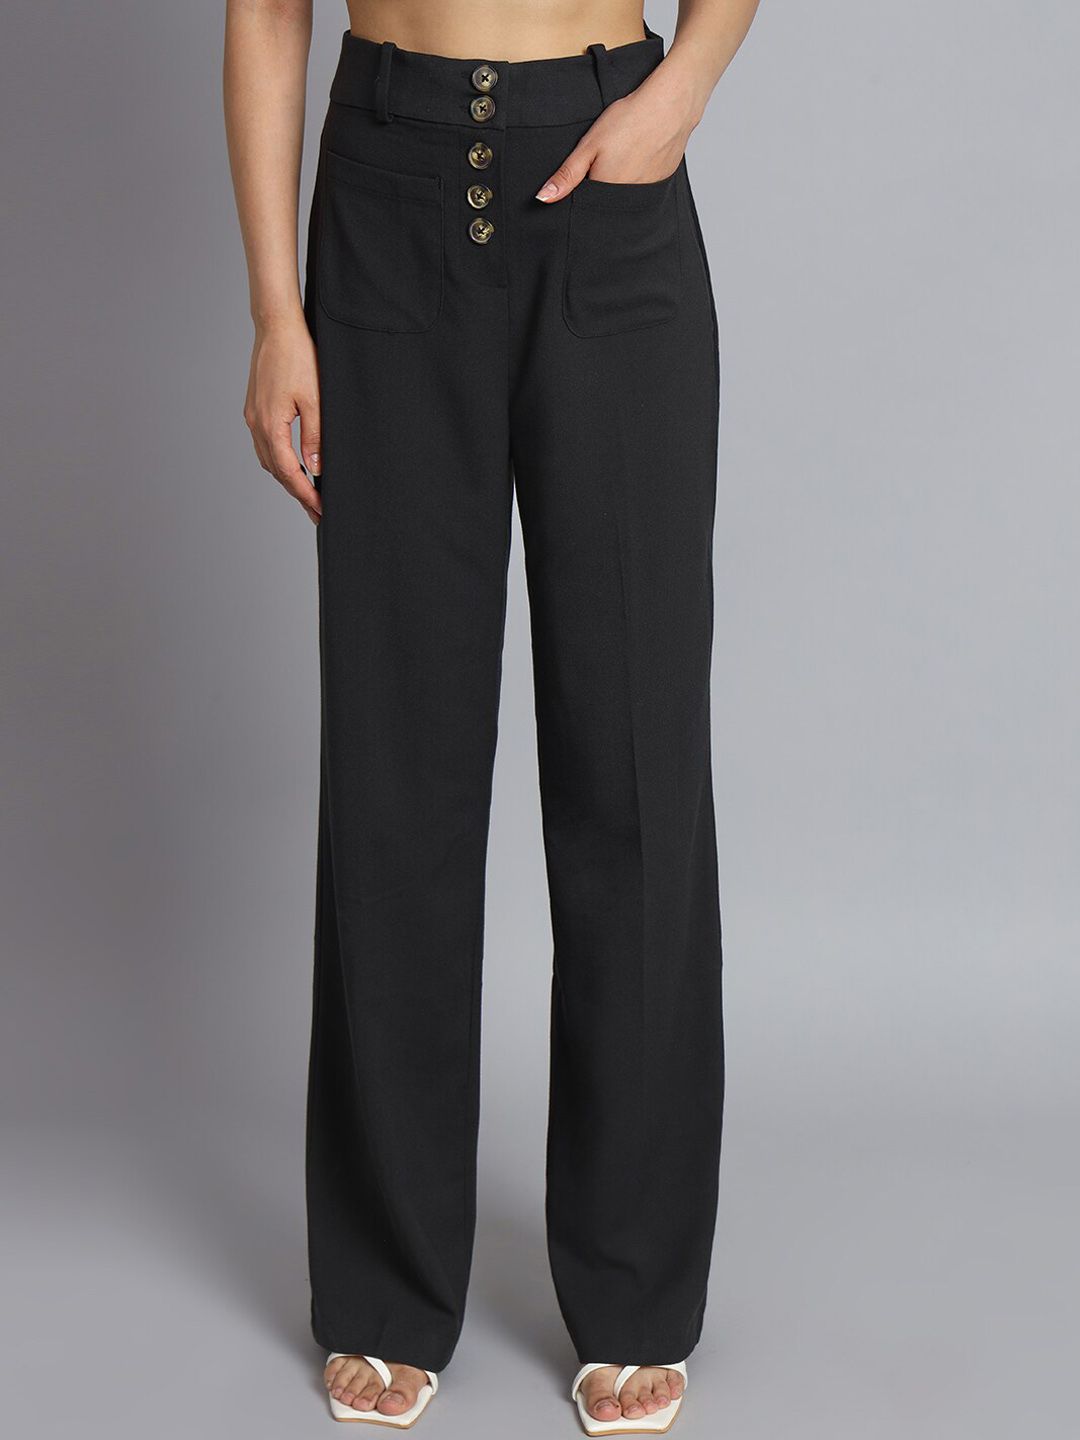 NoBarr Women High-Rise Parallel Trousers Price in India